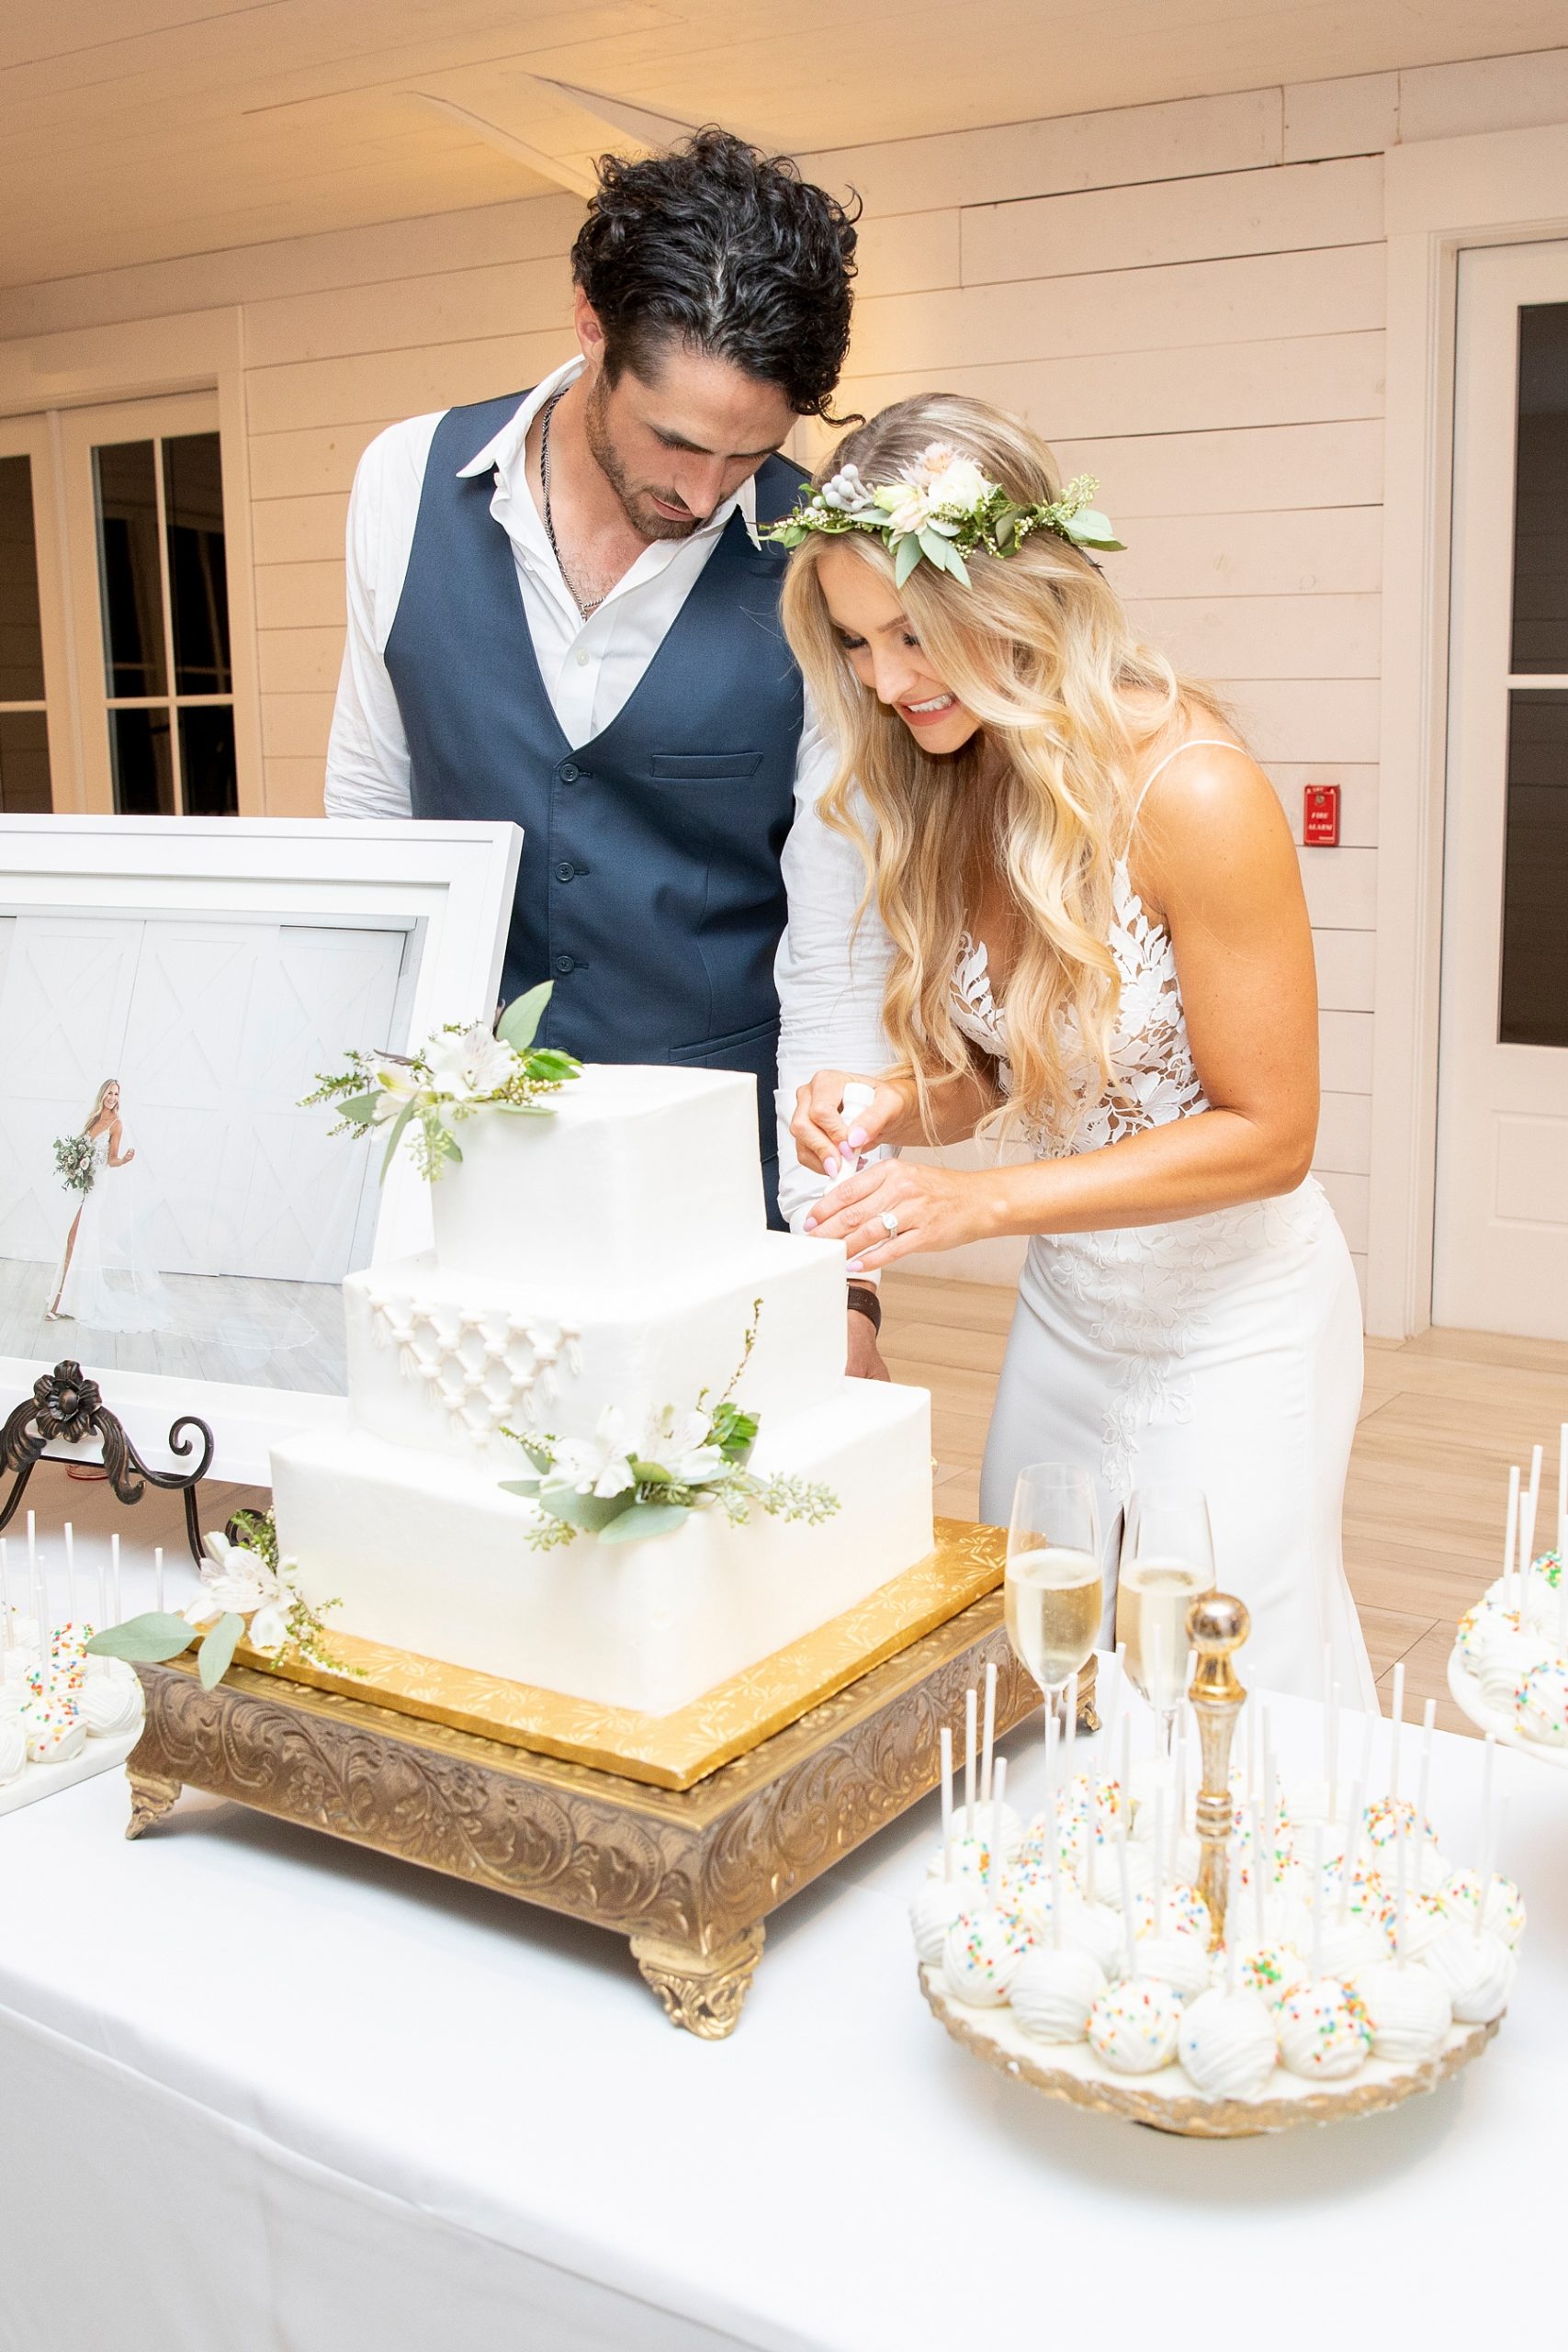 cake cutting at Texas wedding reception photographed by Randi Michelle